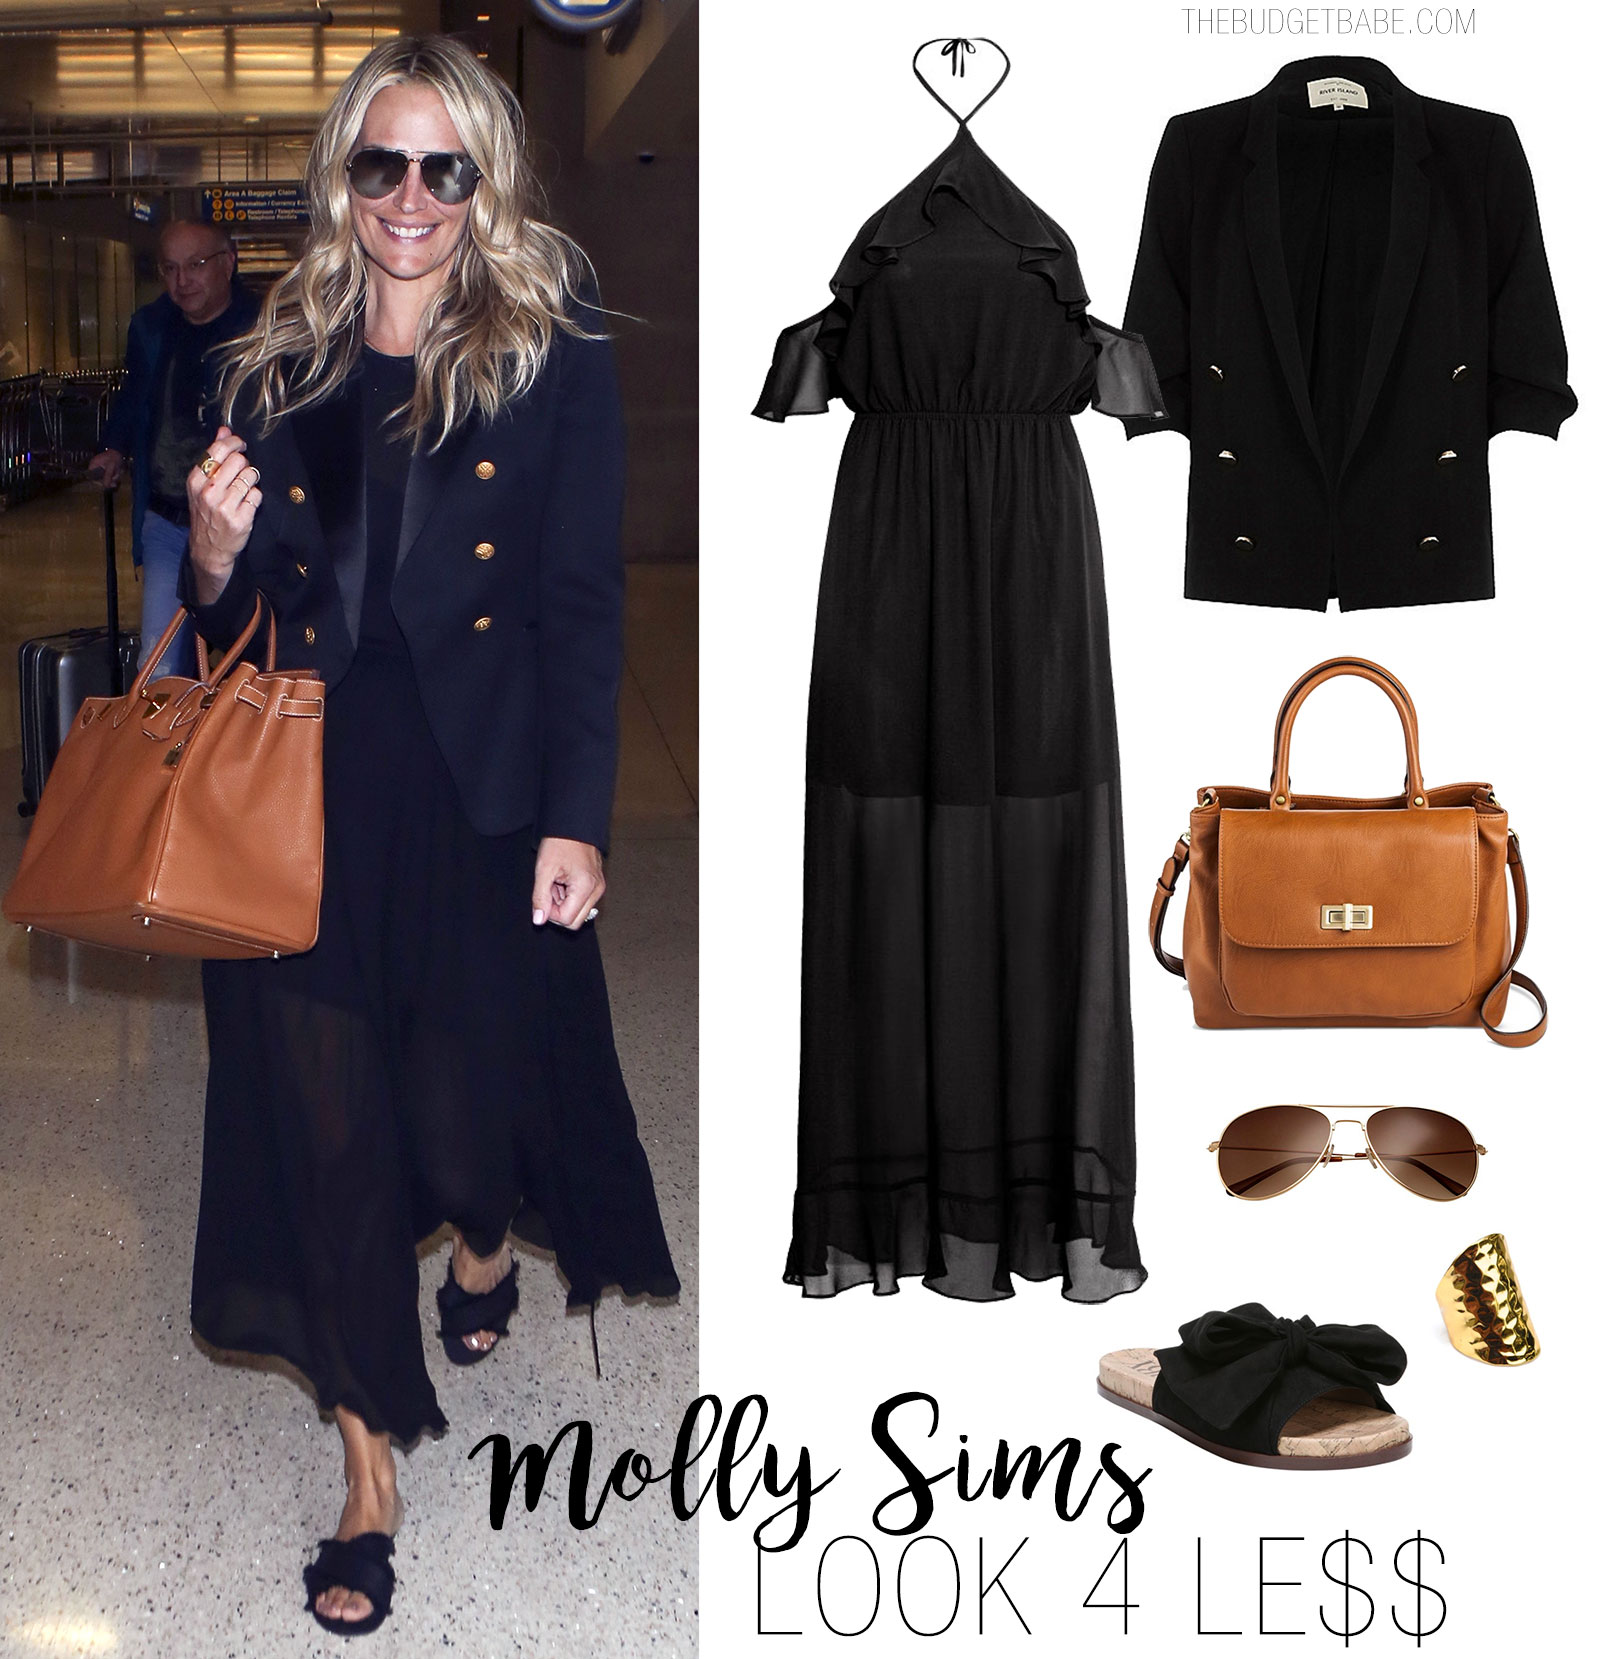 Molly Sims fashion style is classic and chic.